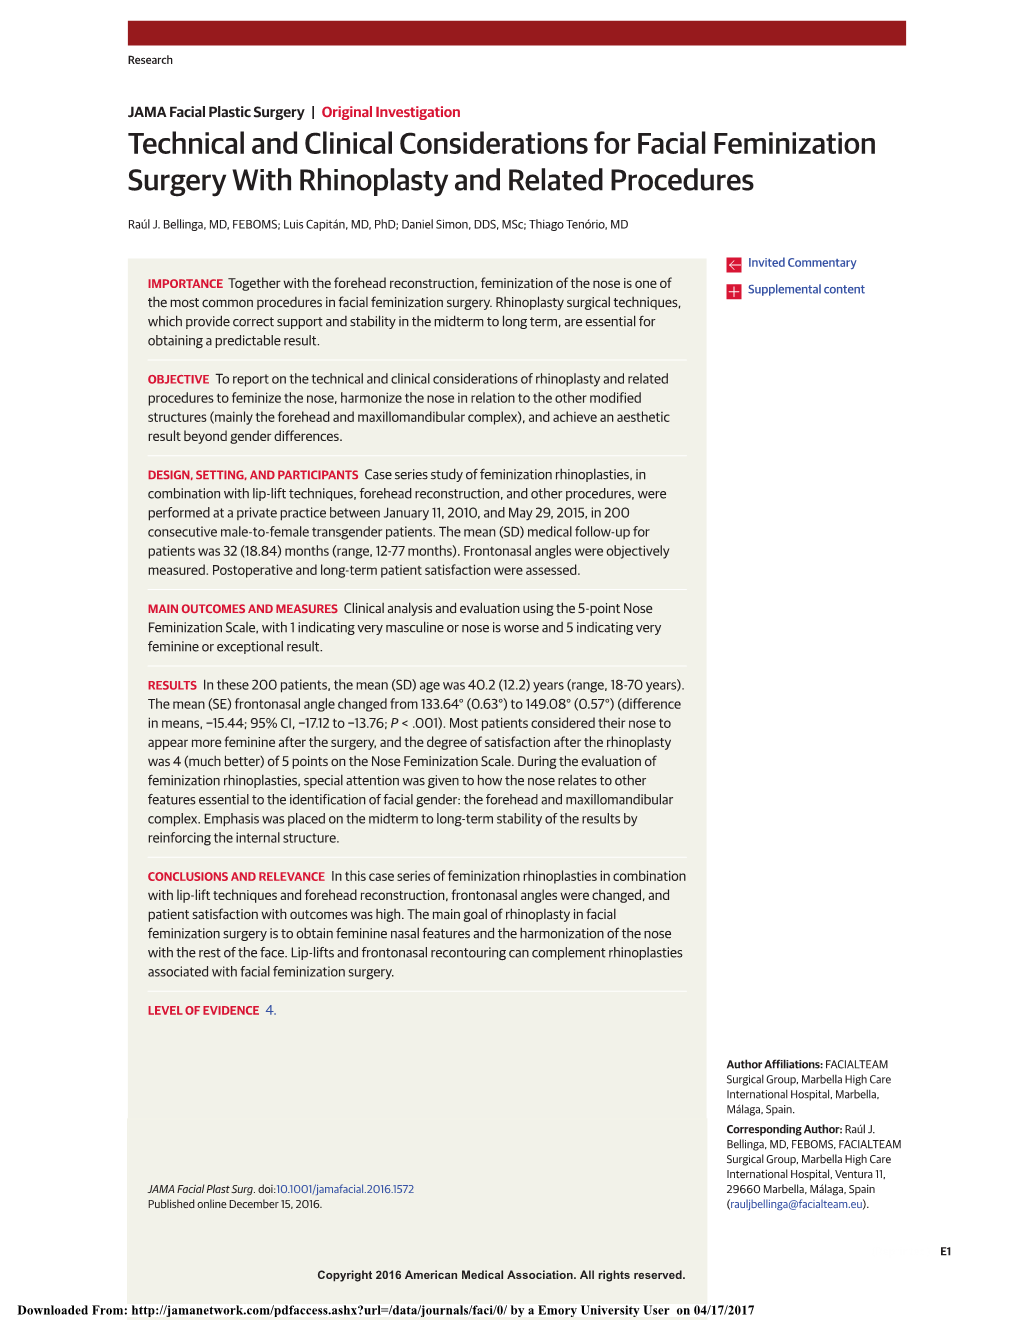 Technical and Clinical Considerations for Facial Feminization Surgery with Rhinoplasty and Related Procedures